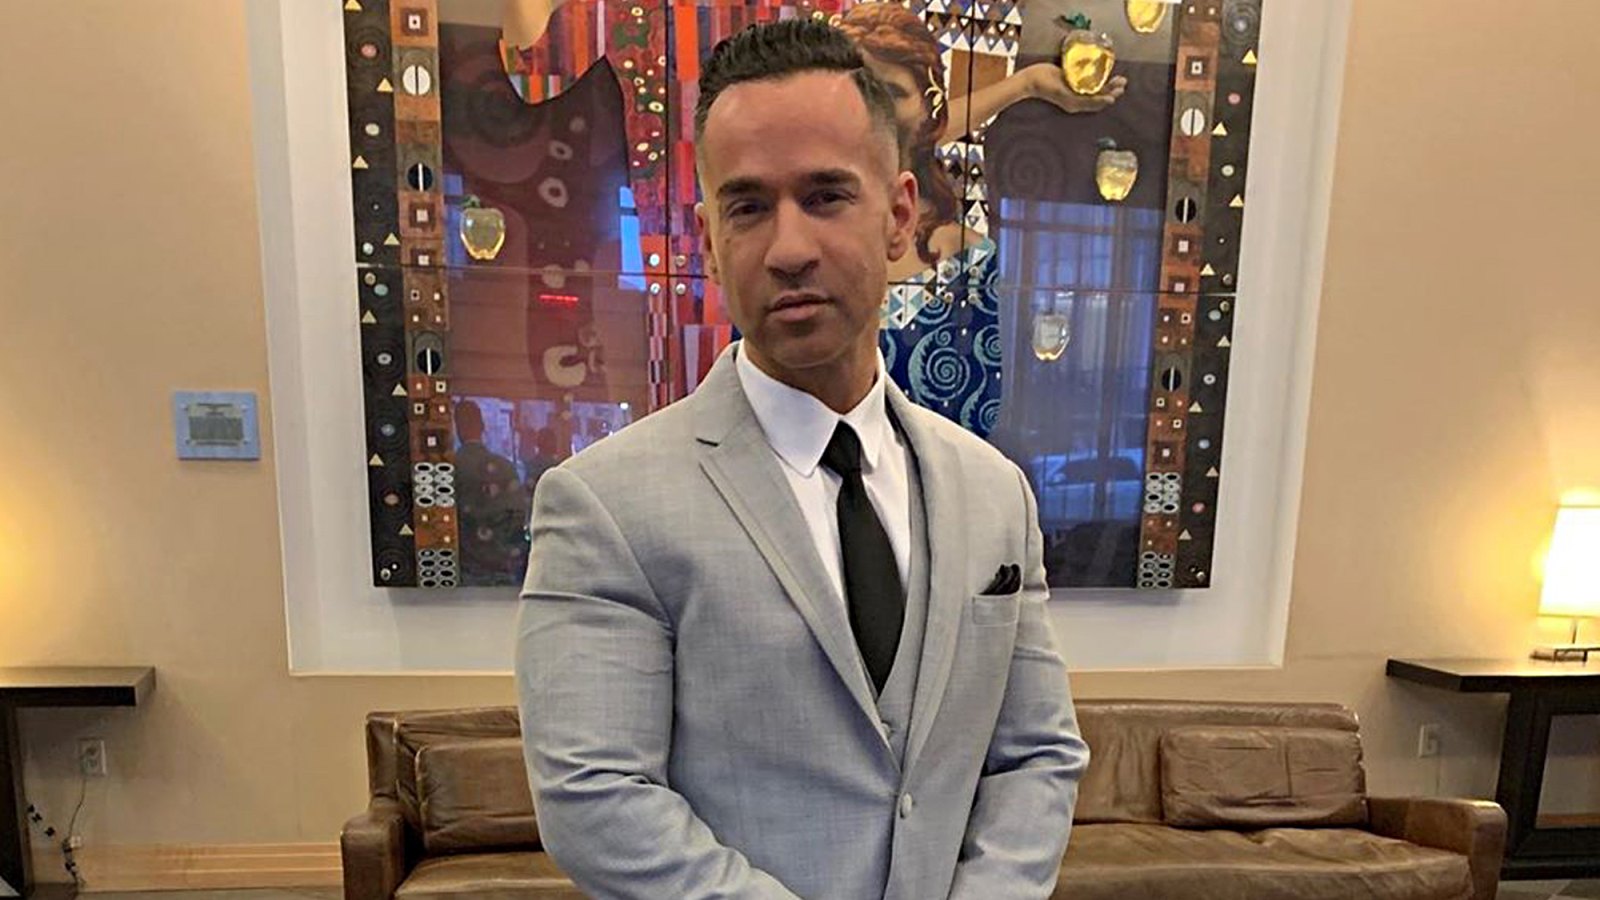 Mike ‘The Situation’ Sorrentino Defends His ‘Successful’ Recovery Journey